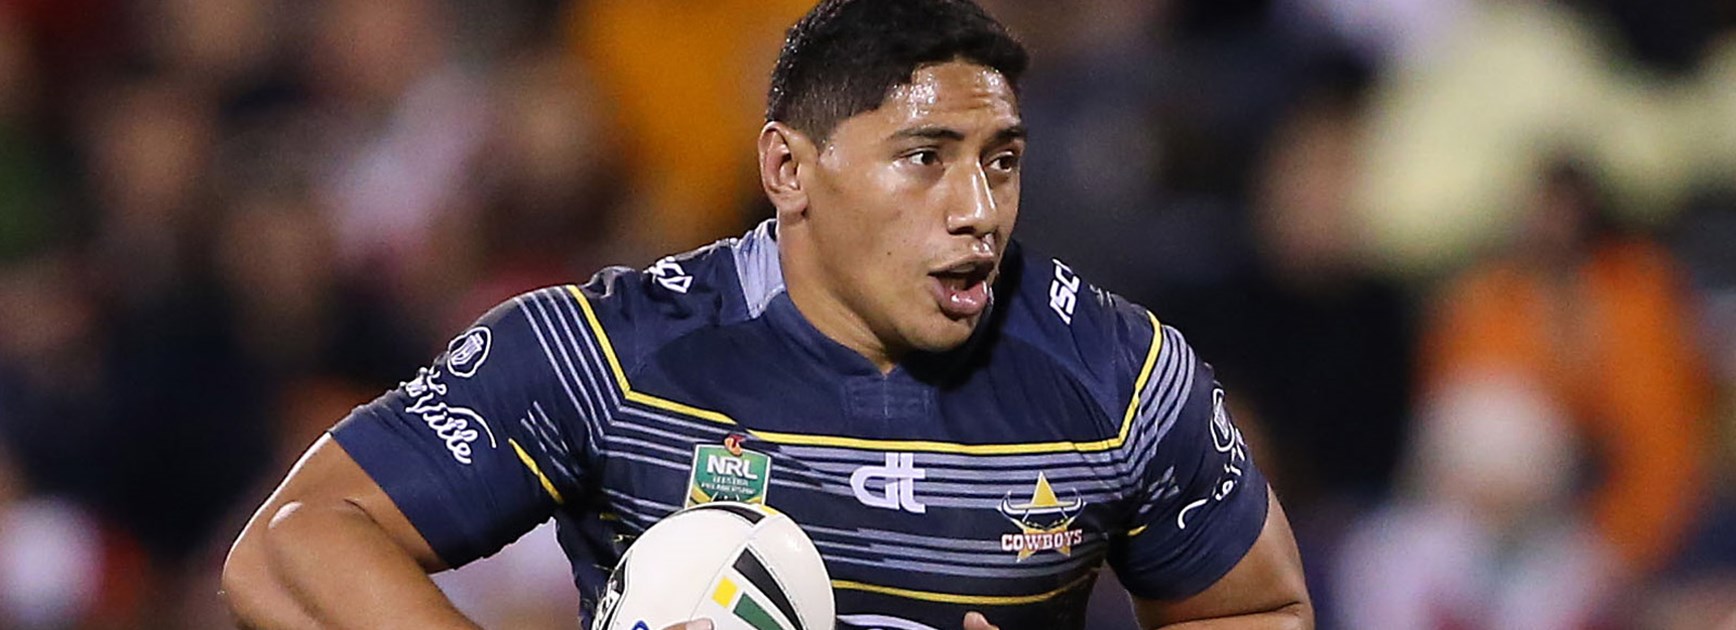 Cowboys lock Jason Taumalolo against the Dragons in Round 12.